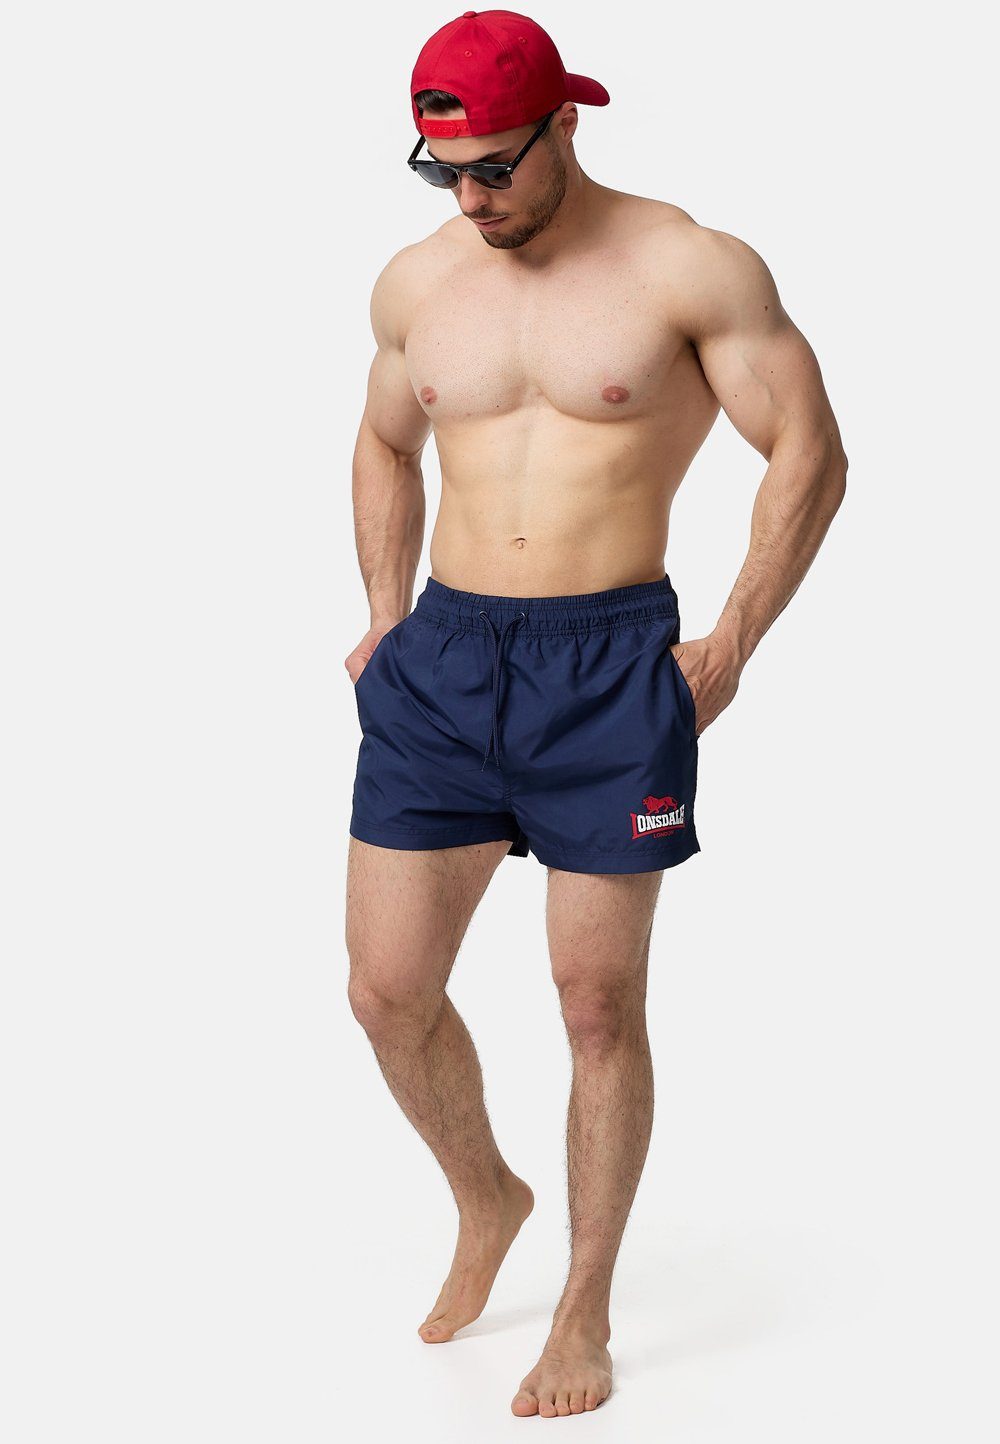 Lonsdale Badehose Navy/Red/White KILSTAY